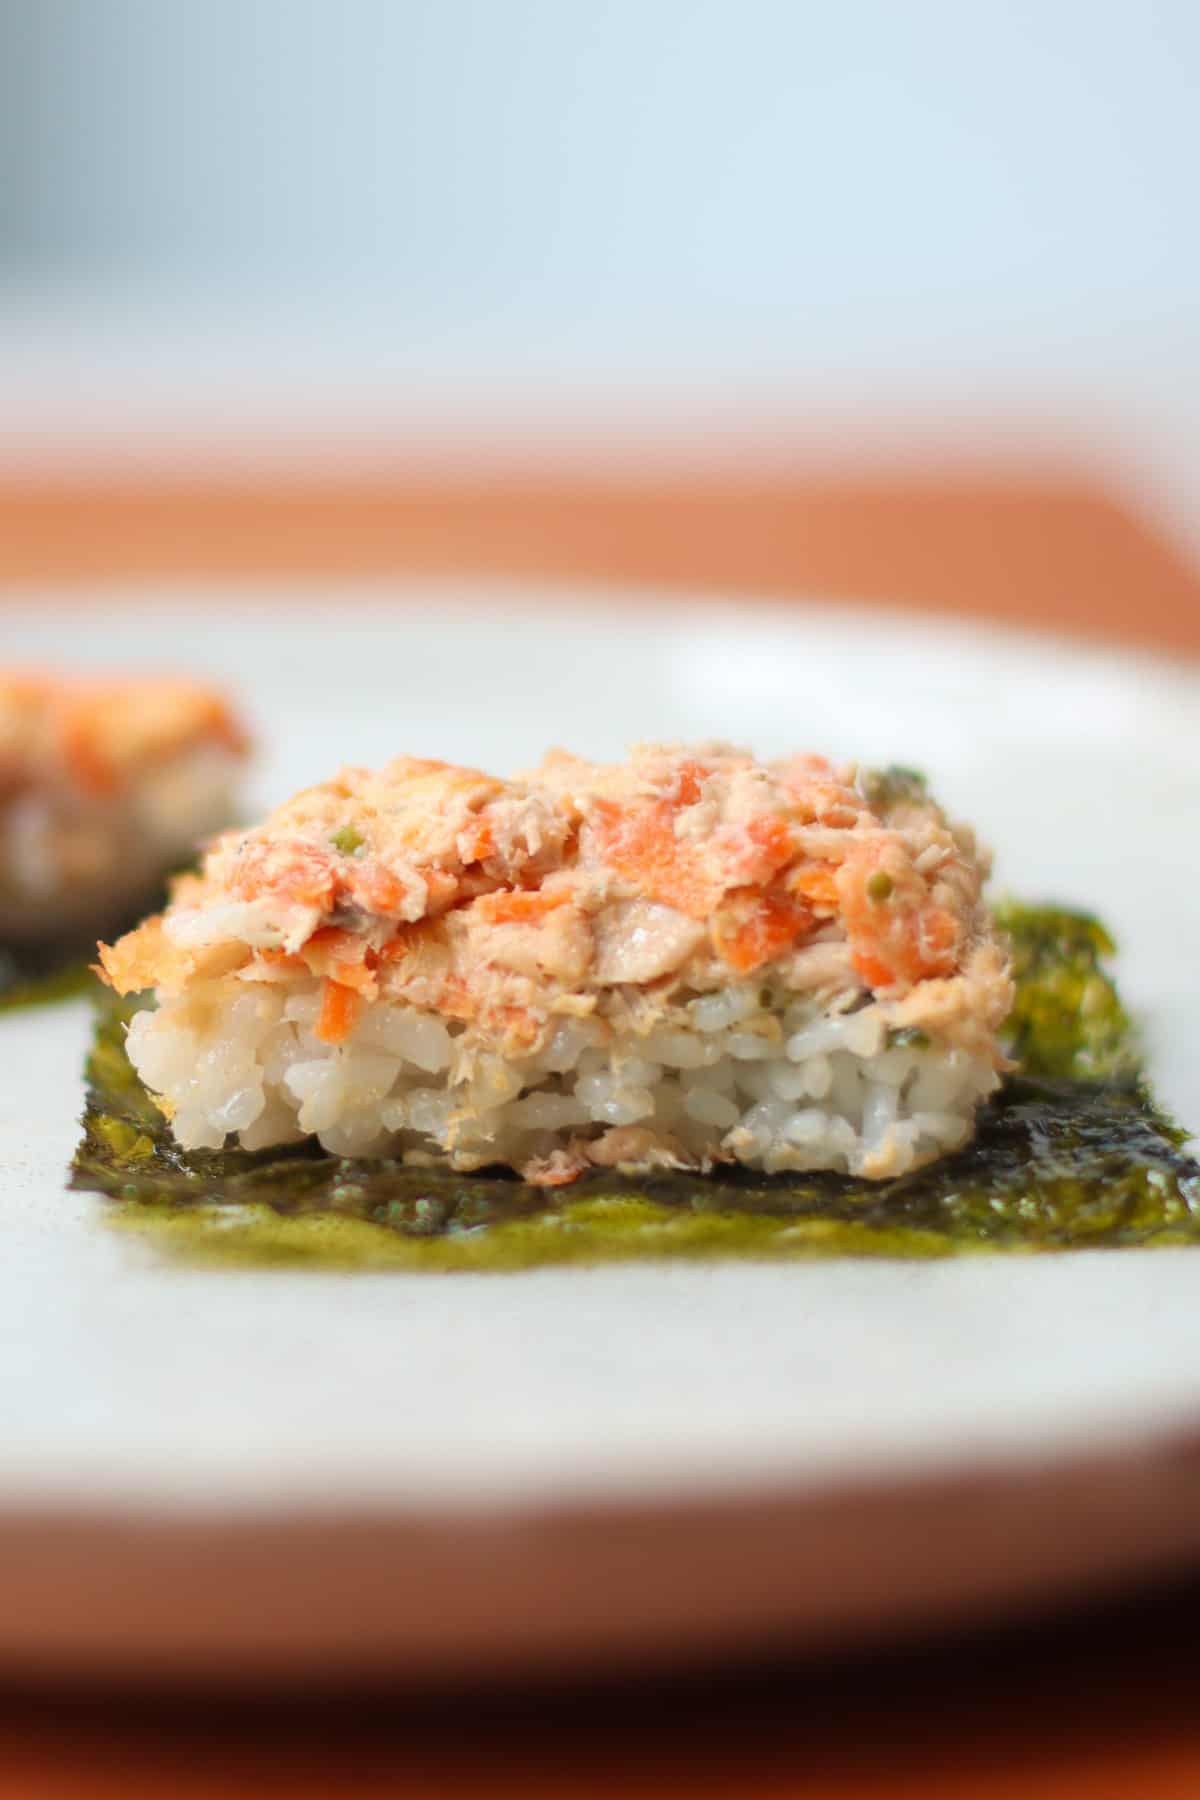 A close up shot of scooped sushi bake on top of seaweed sheet.